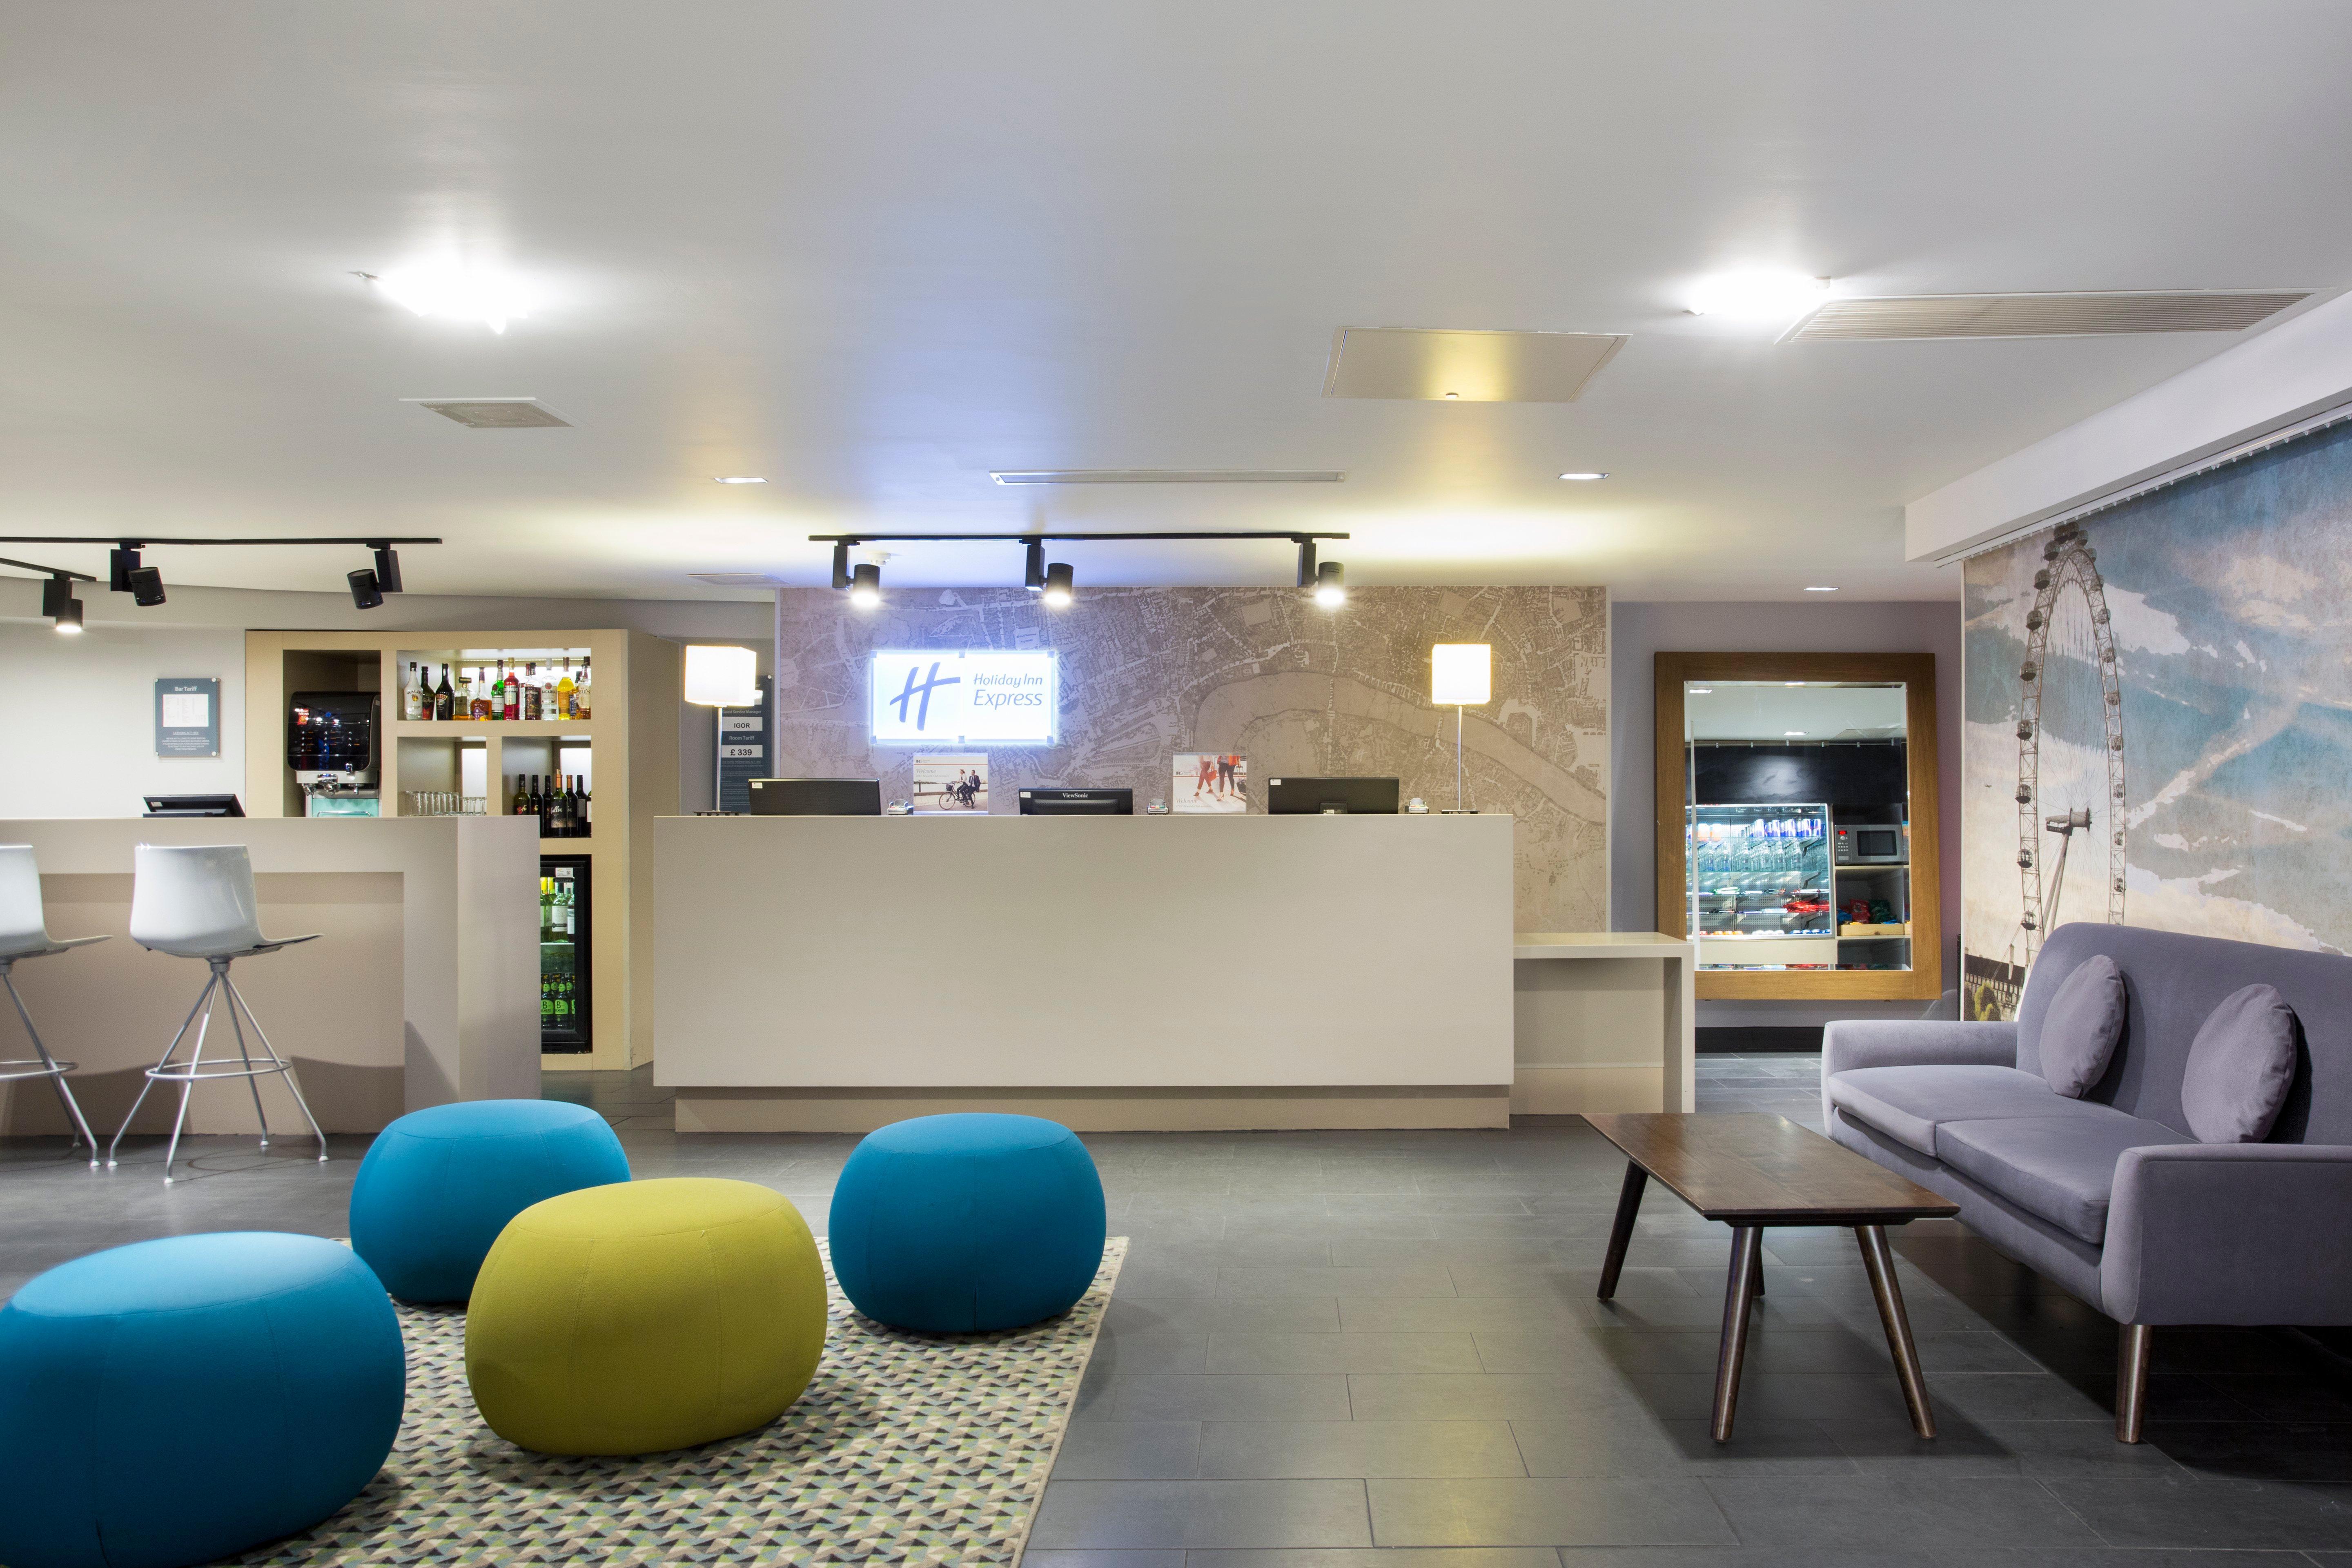 HOLIDAY INN EXPRESS SOUTHWARK, AN IHG HOTEL LONDON 3* (United Kingdom) -  from C$ 220 | iBOOKED